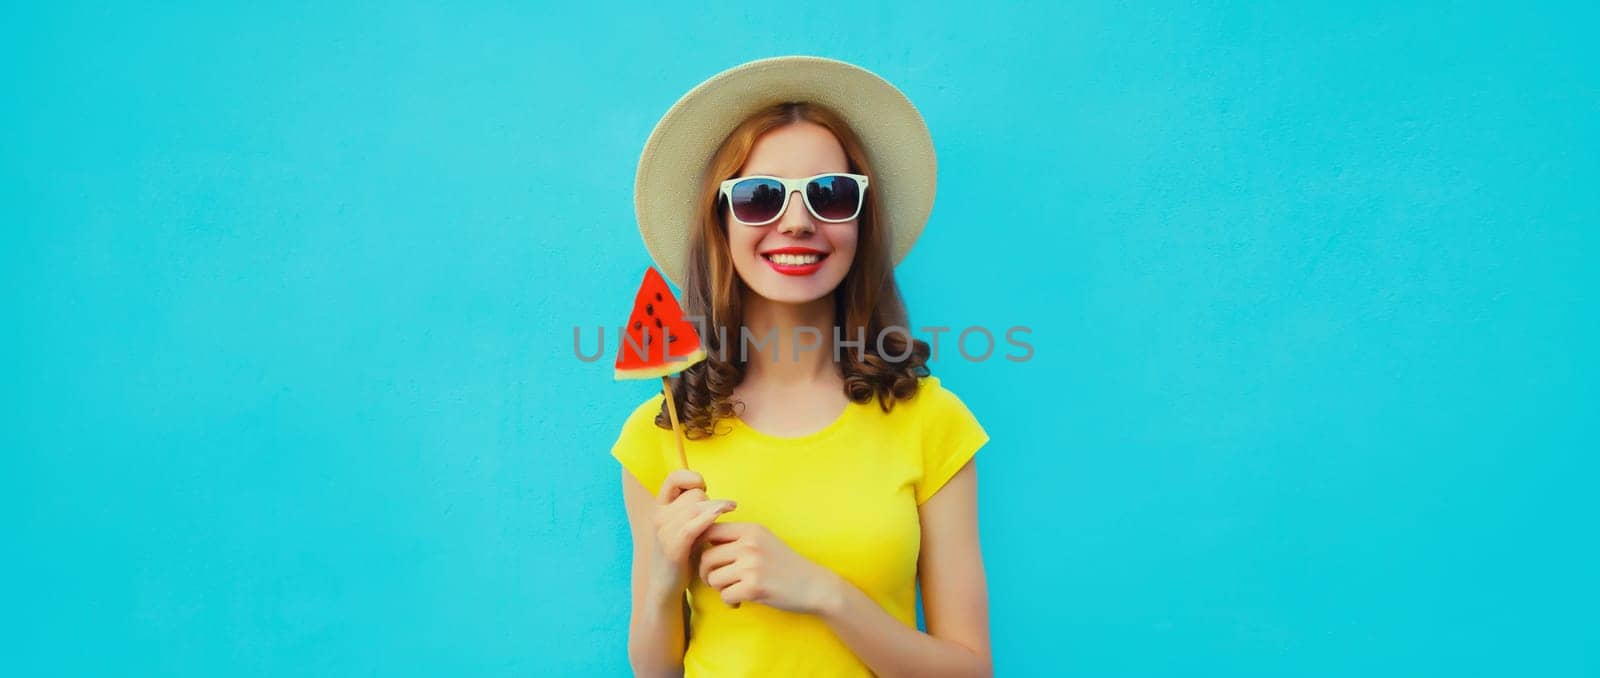 Summer portrait of happy young woman with lollipop or ice cream shaped slice of watermelon wearing straw hat on blue studio background